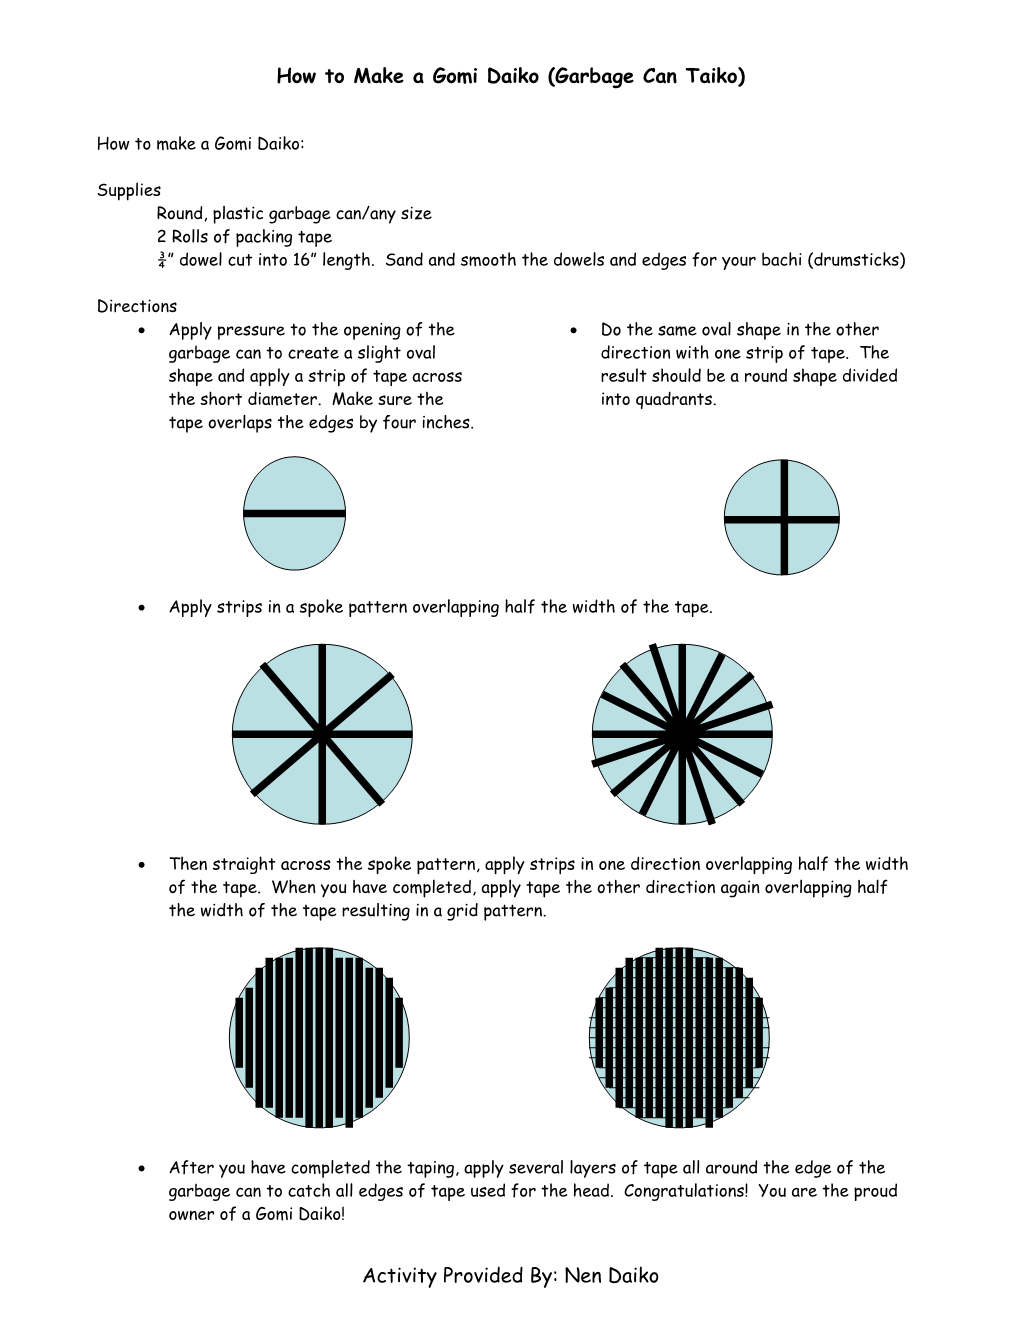 How to Make a Gomi Daiko (Garbage Can Taiko) Activity Provided By: Nen Daiko